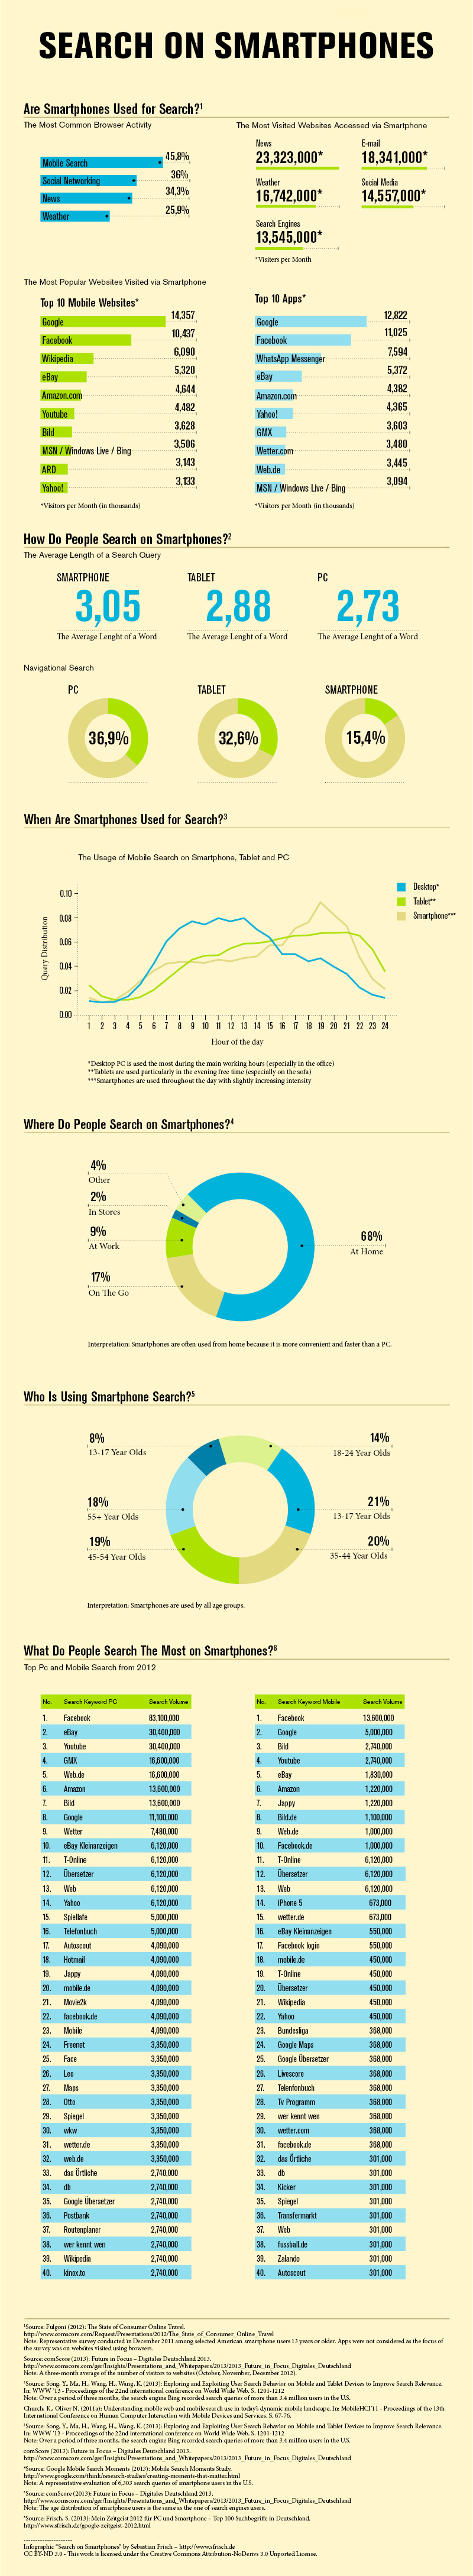 Mobile Search - How People Search on Smartphones